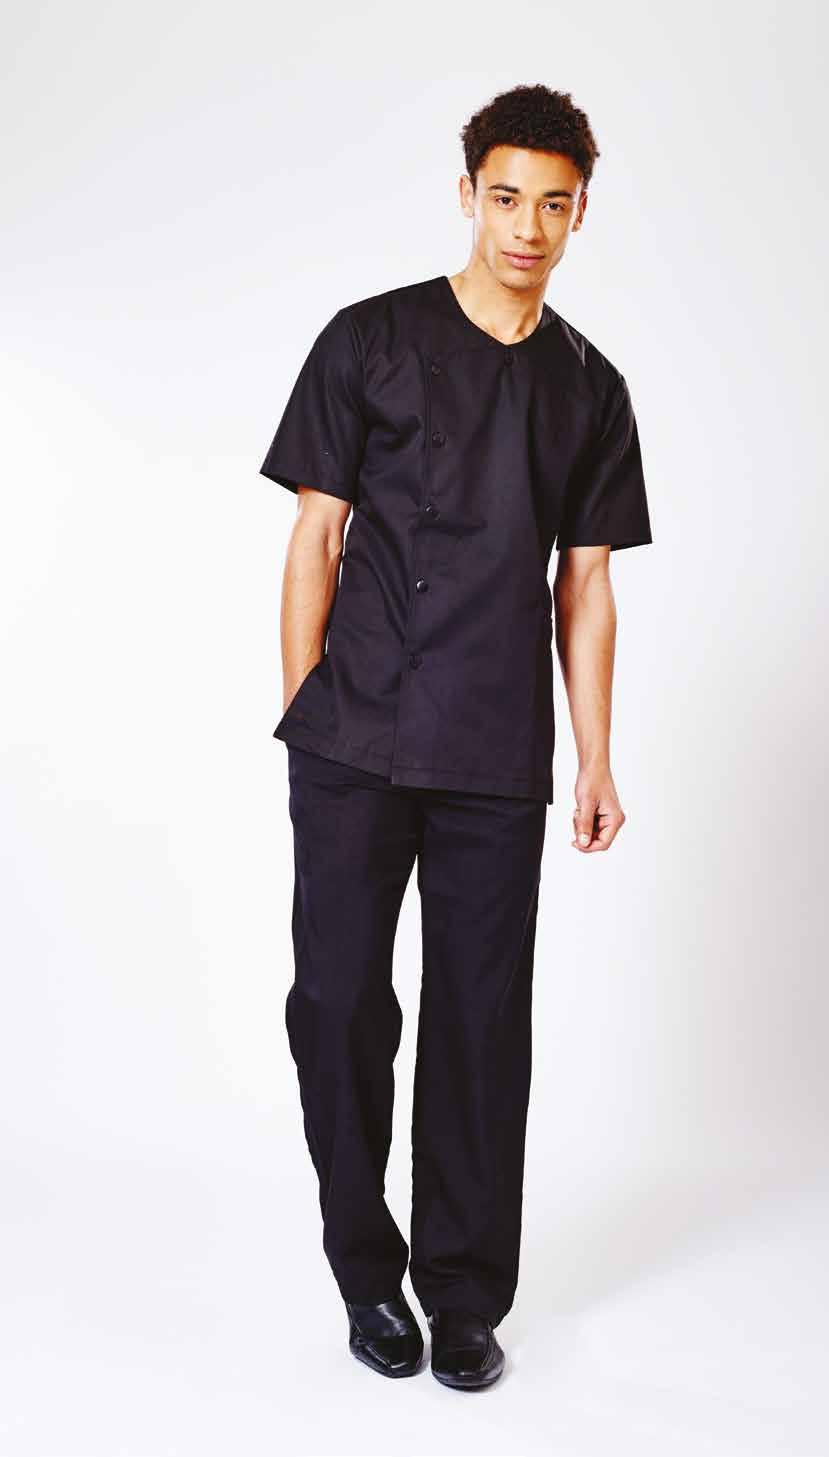 Trousers ETIENNE This tunic features a slightly scooped neckline, front button fastening with a front pocket and side